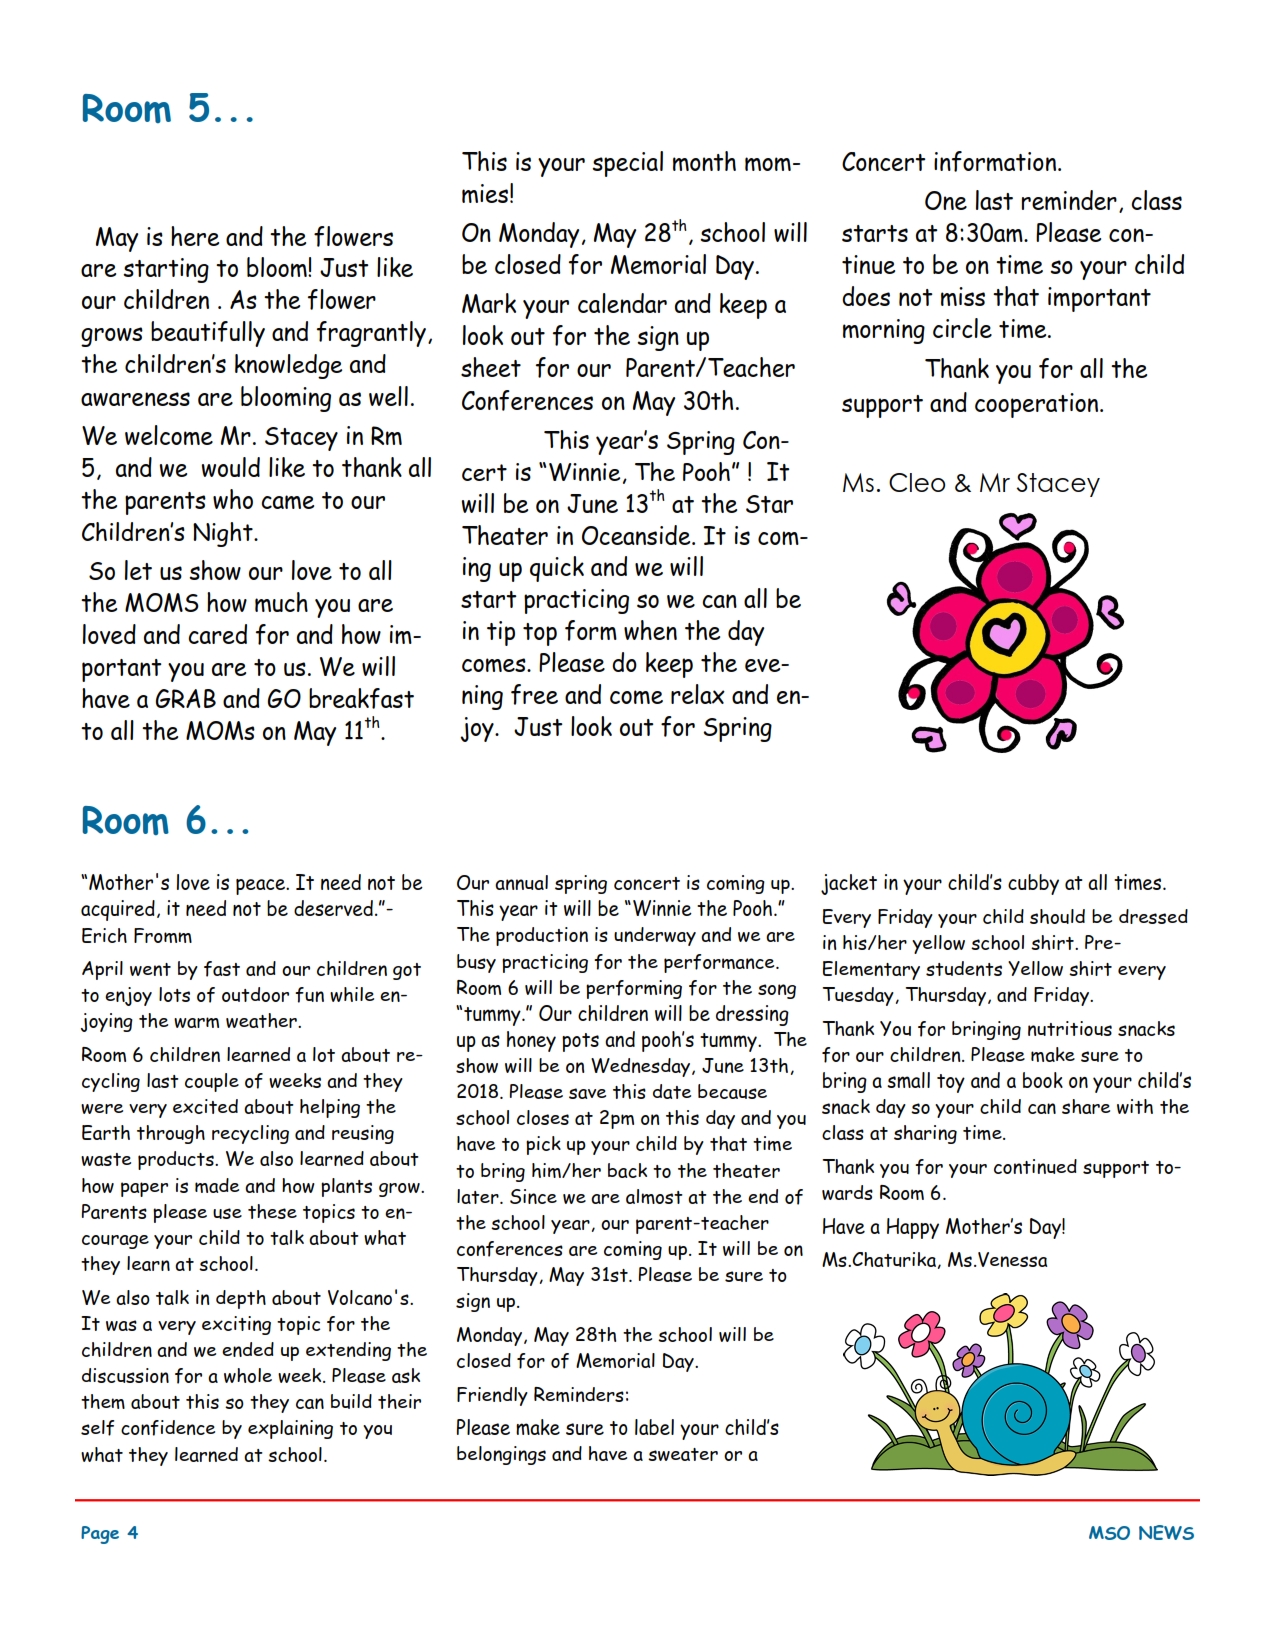 MSO May 2018 Newsletter. Room 5 and Room 6